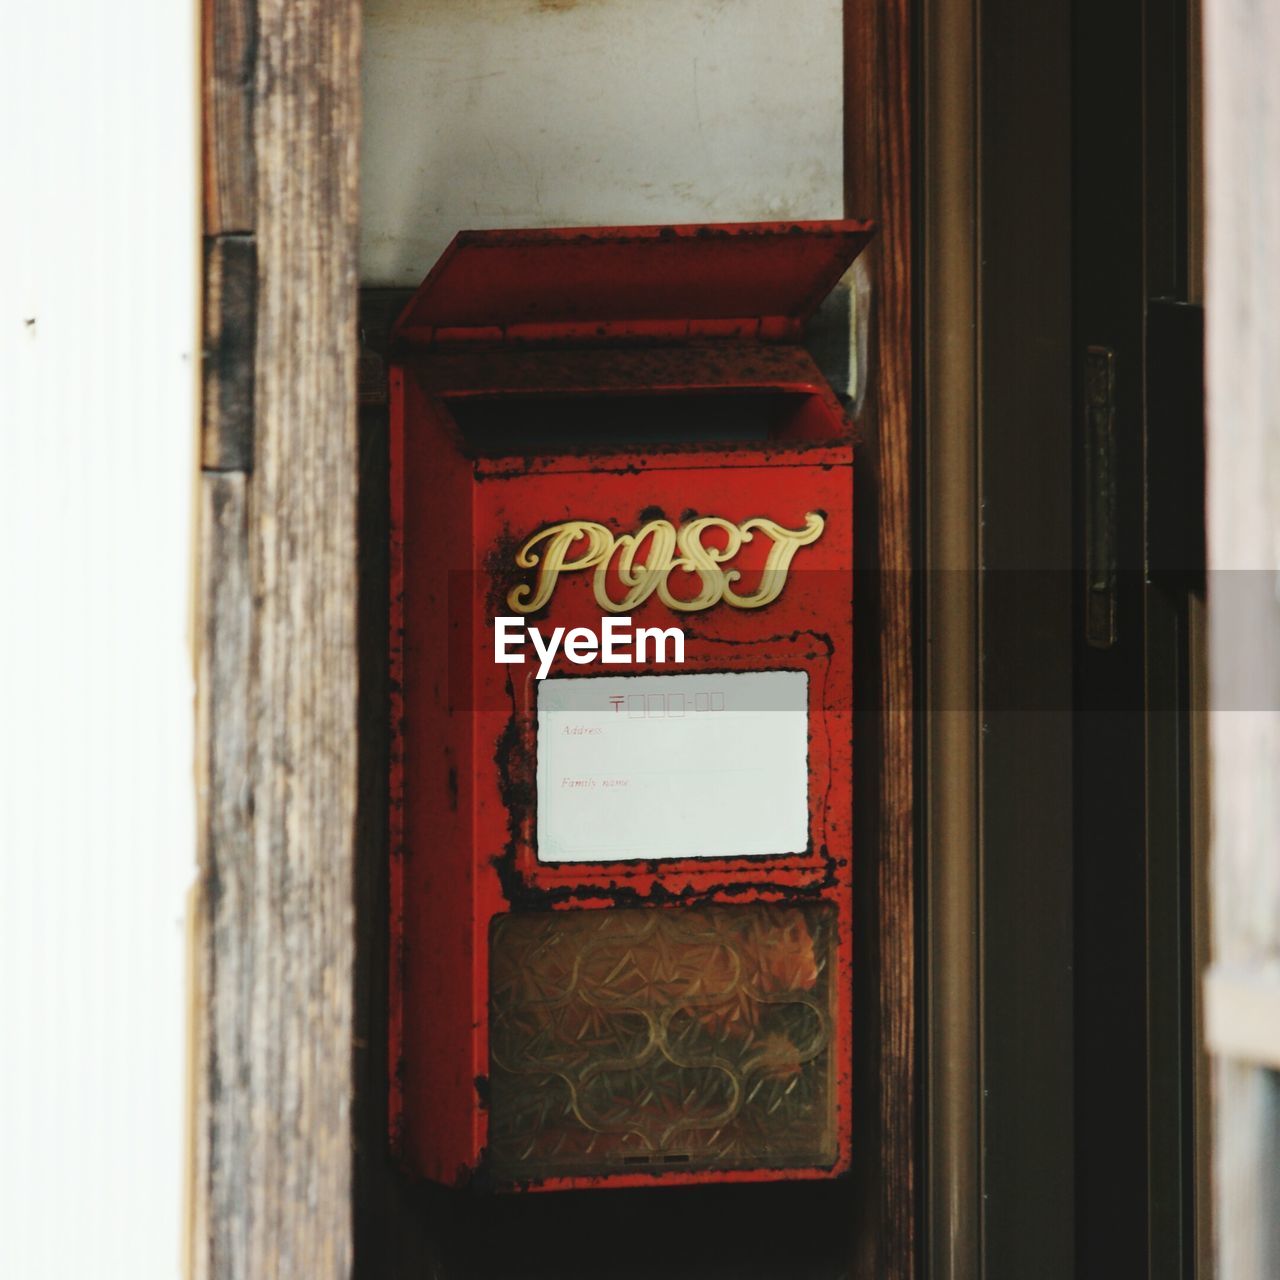 Close-up of red mailbox on door